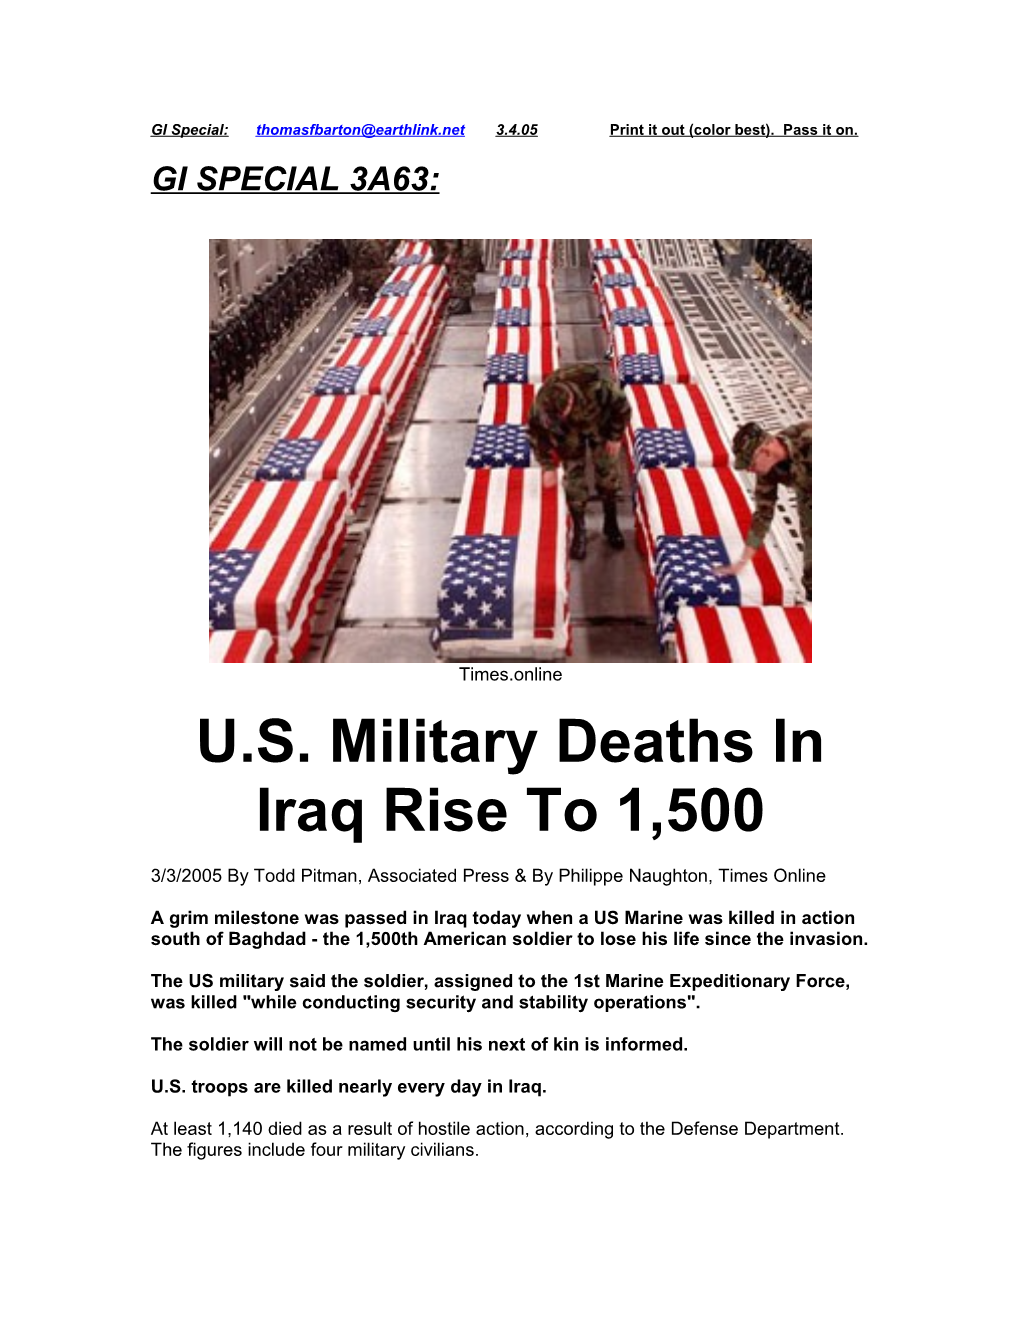 U.S. Military Deaths in Iraq Rise to 1,500